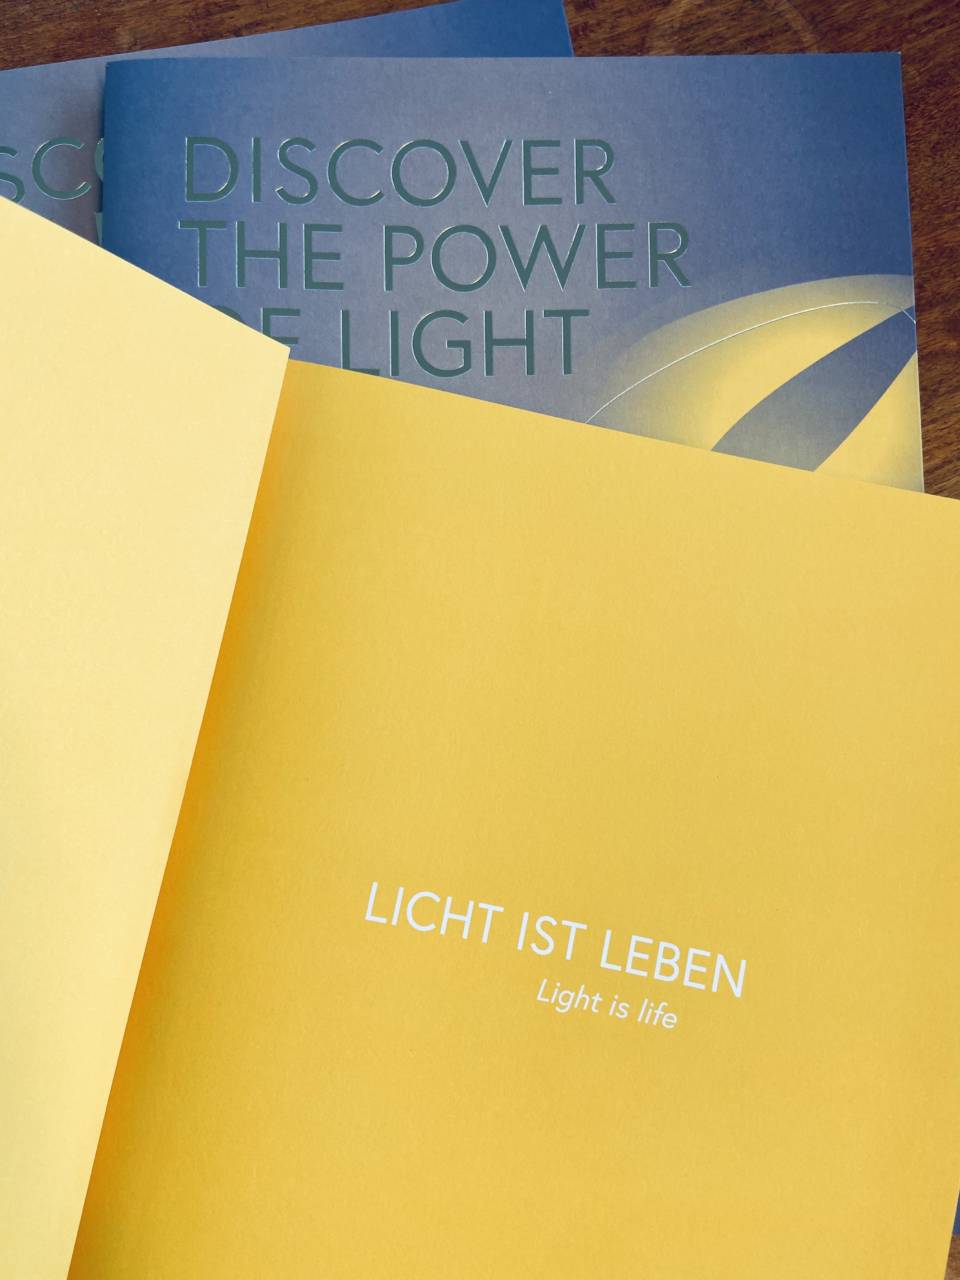 lichtbasis: Discover the power of light lichtbasis - image catalog